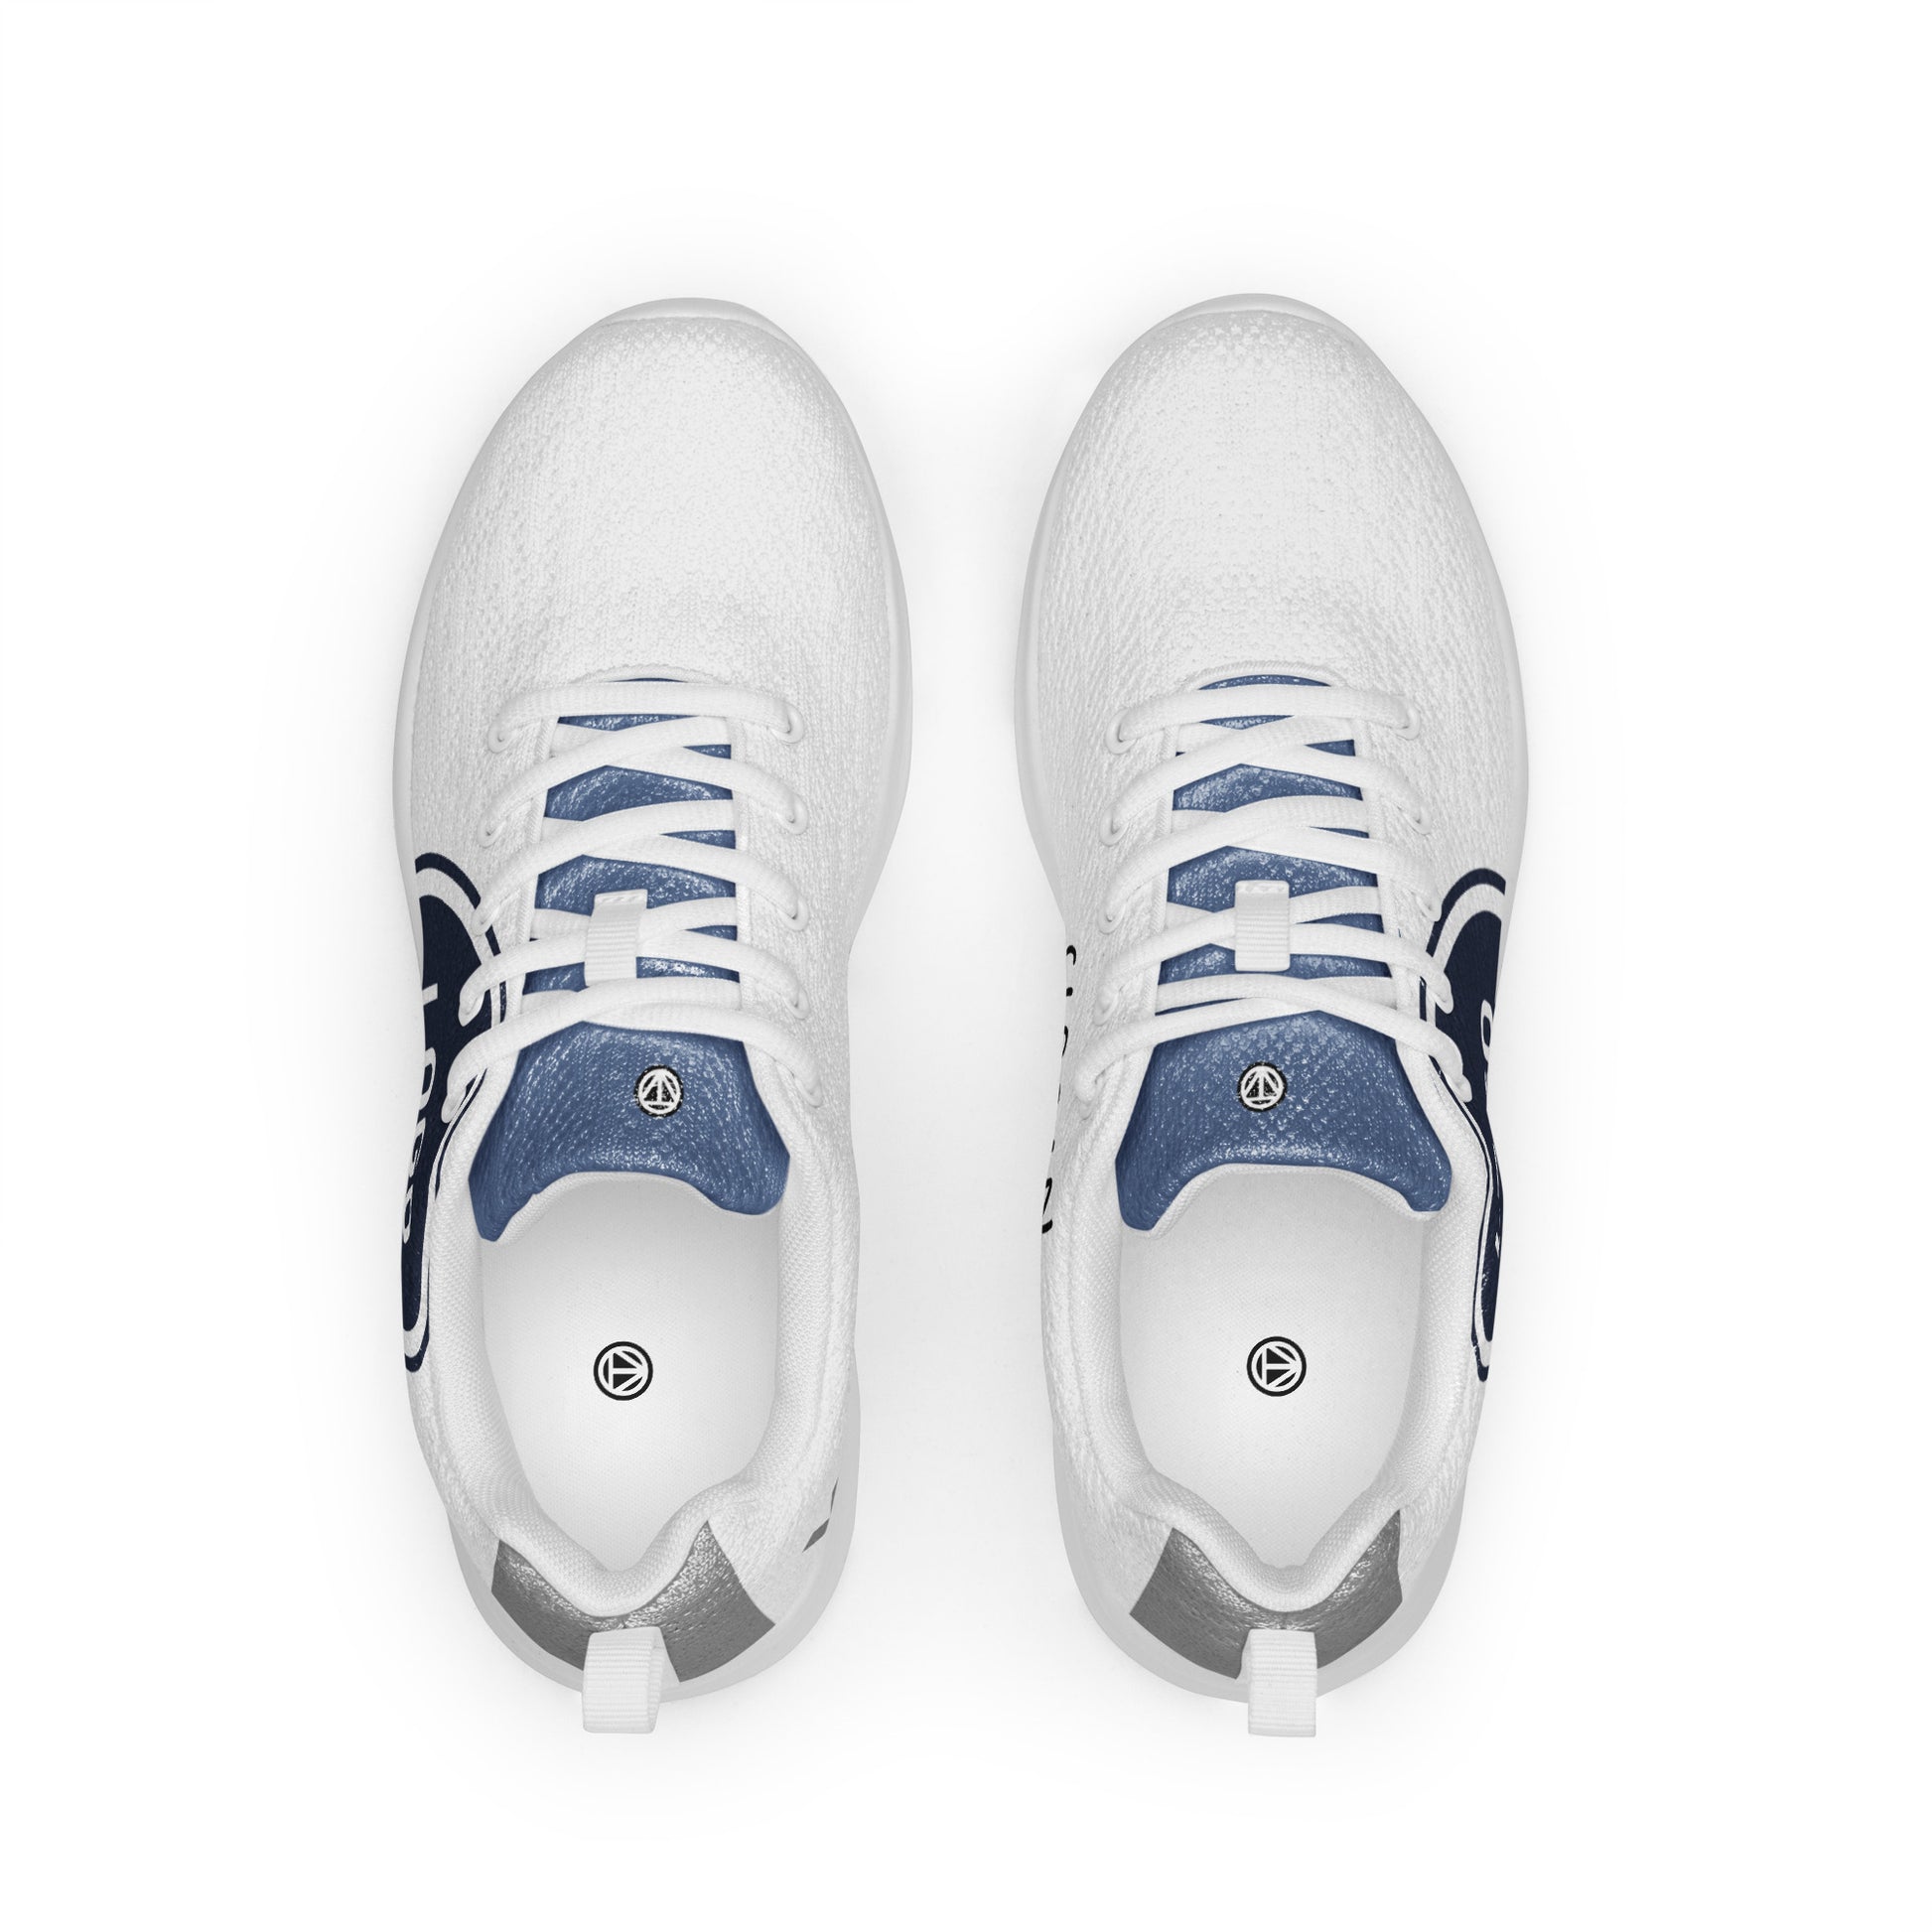 TIME OF VIBES - Men’s athletic shoes CORPORATE - €89.00